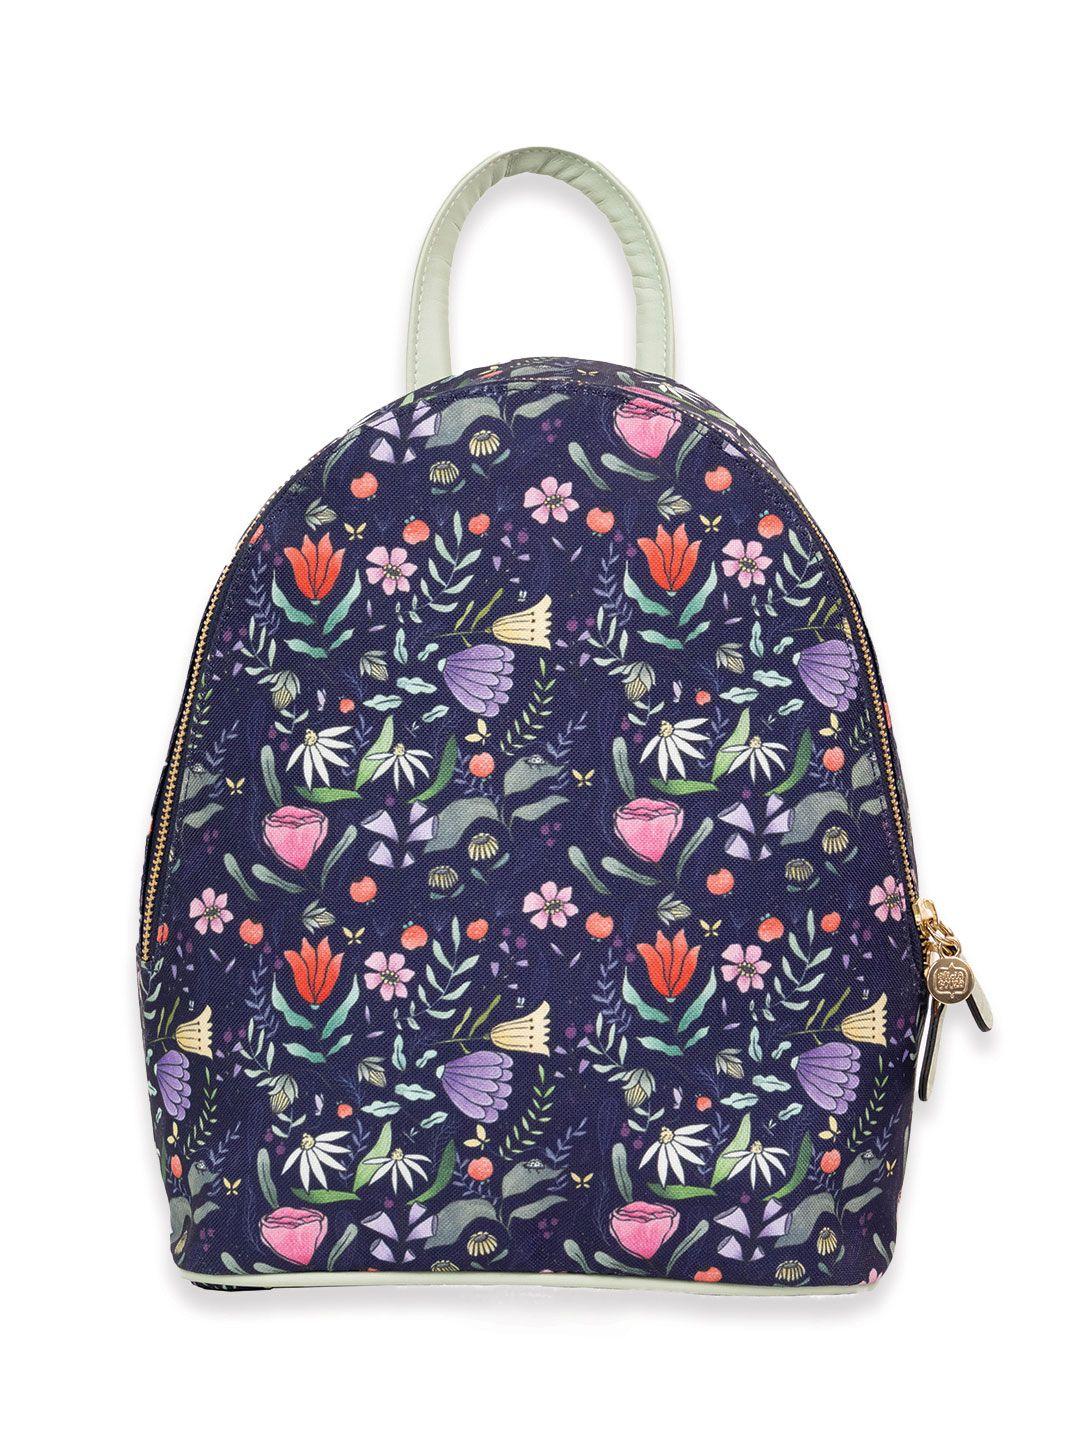 alicia souza floral printed backpack